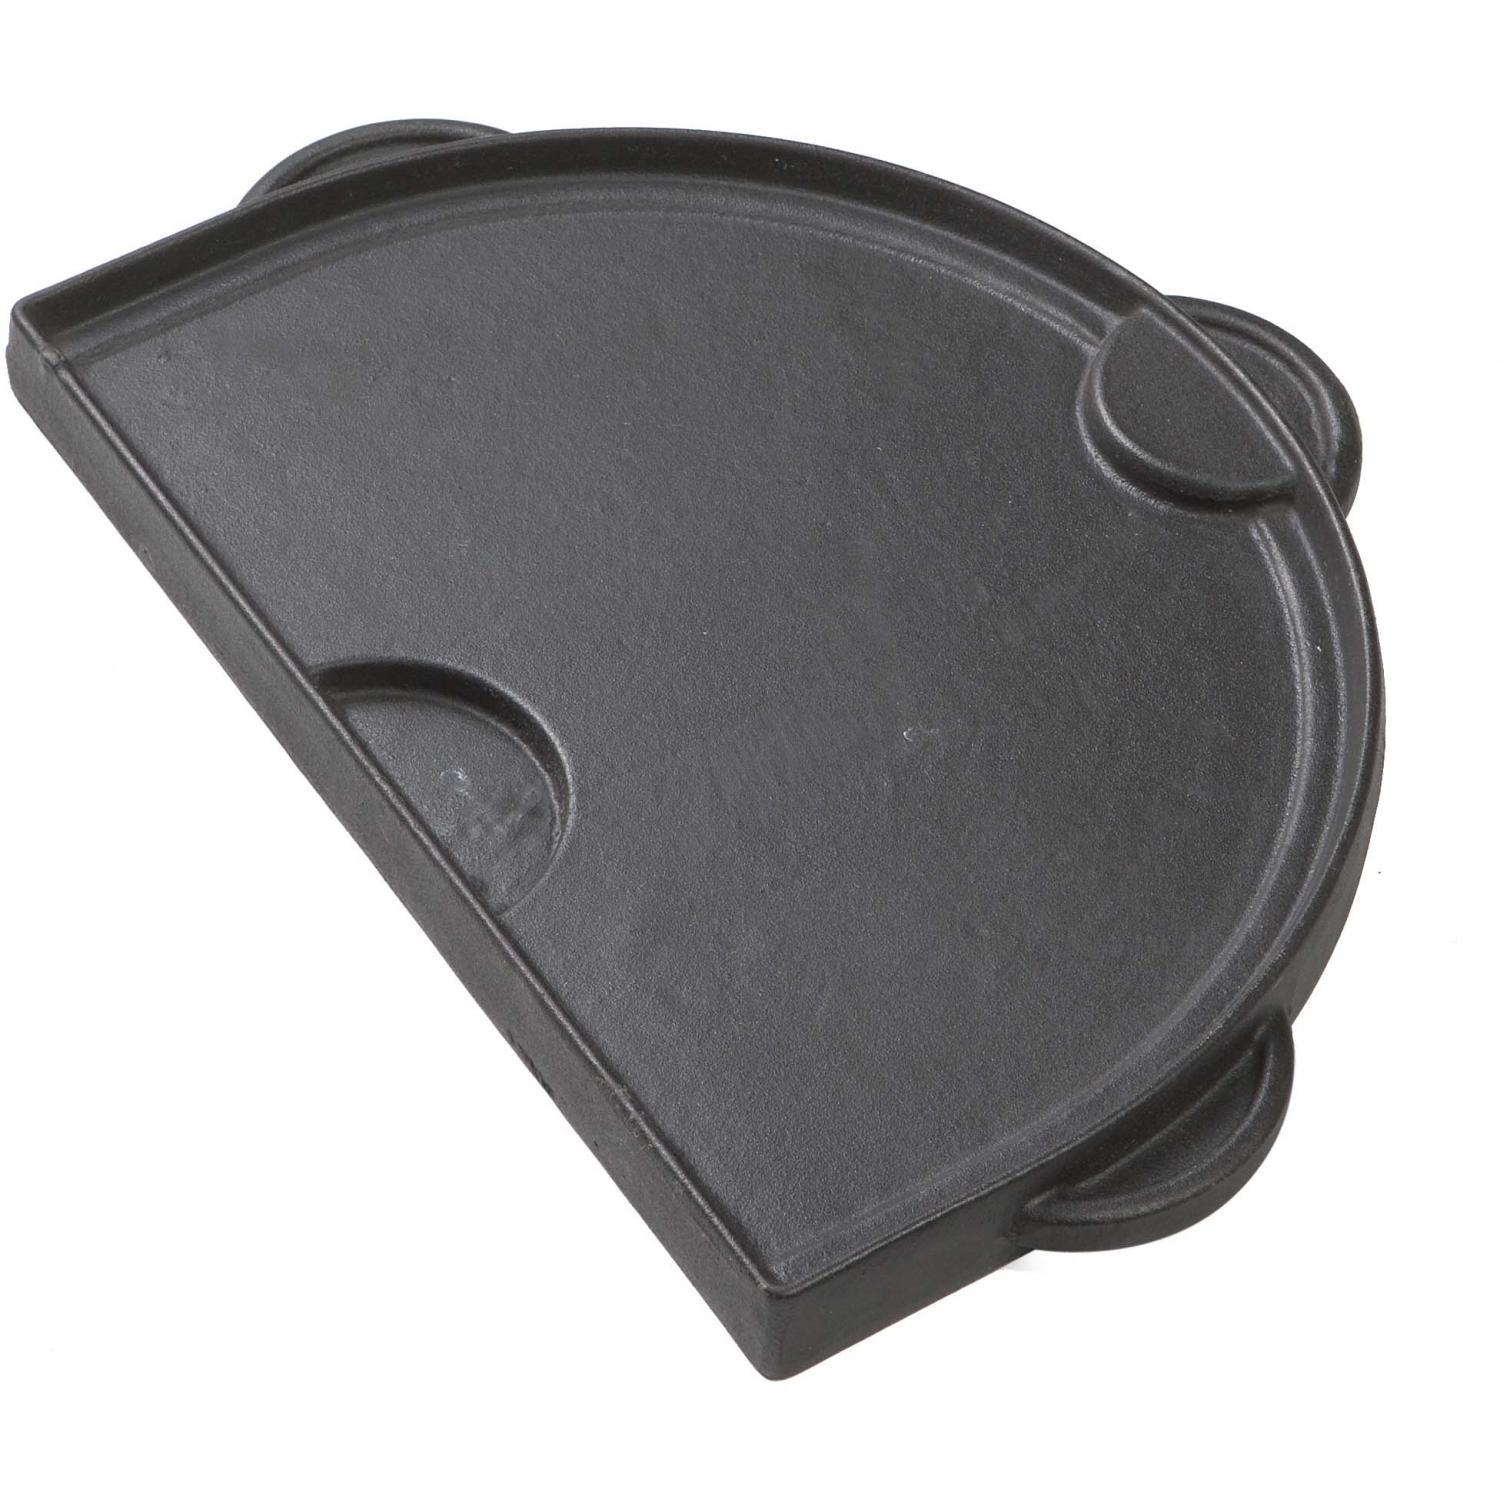 Primo Grills Primo Grills Accessories Primo Grills Cast Iron Griddle for Oval JR 200, Flat and Grooved Sides, (1 pc)